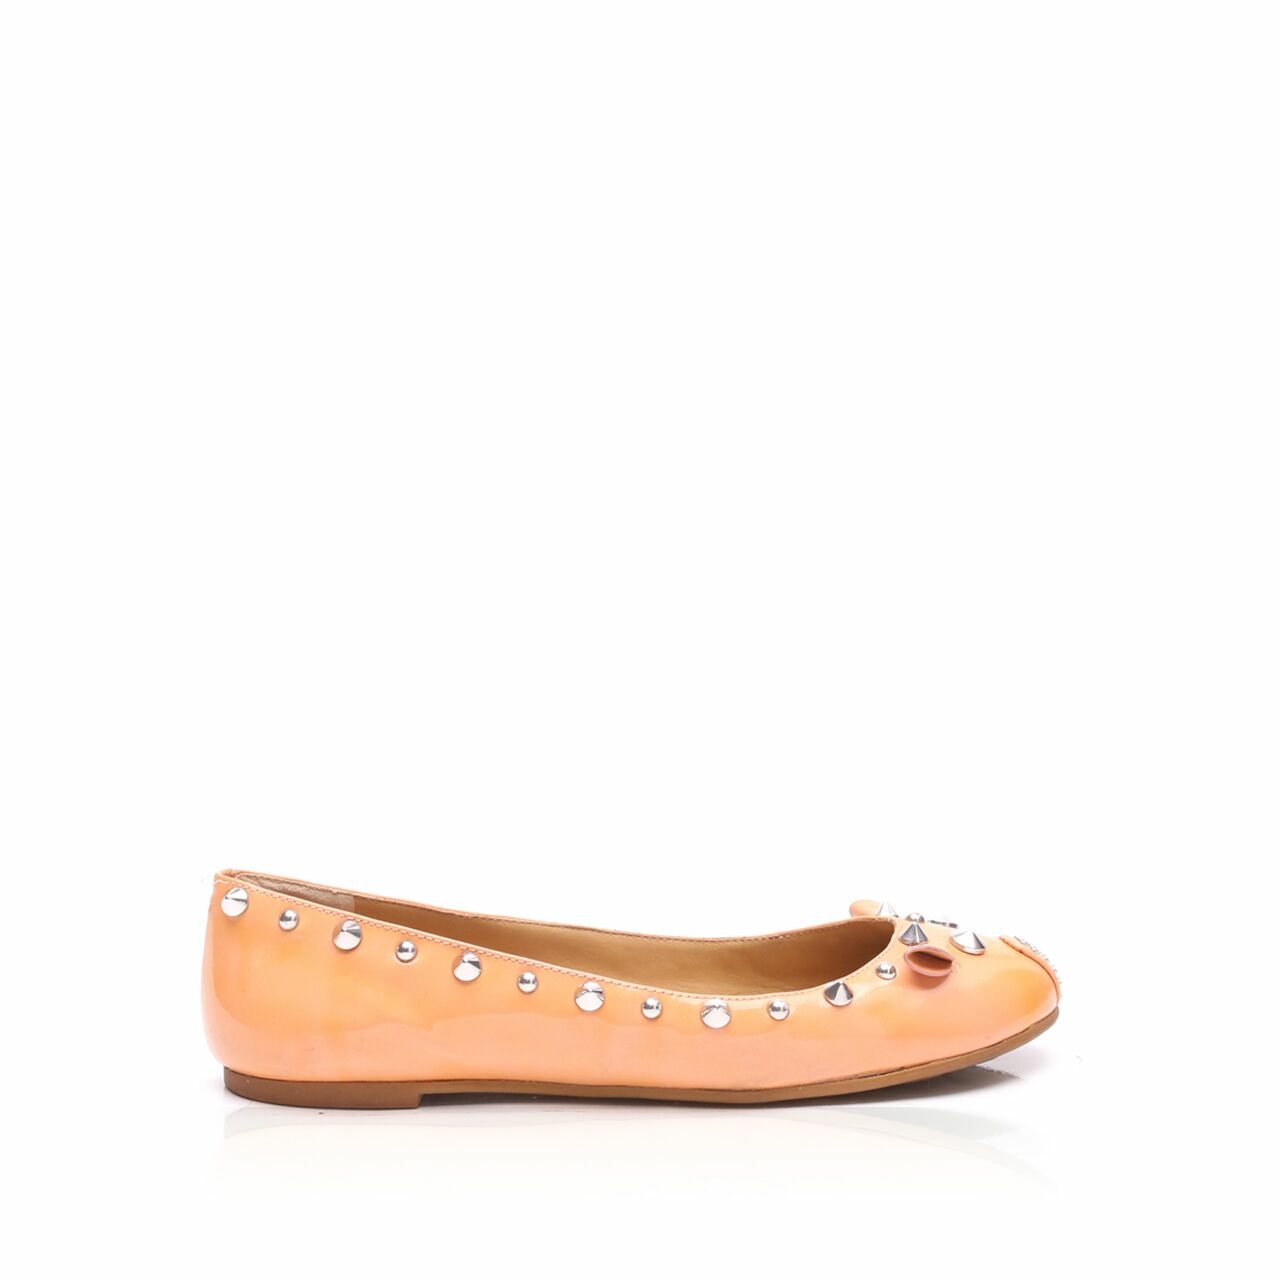 Marc by Marc Jacobs Piggy Pink Flat Shoes